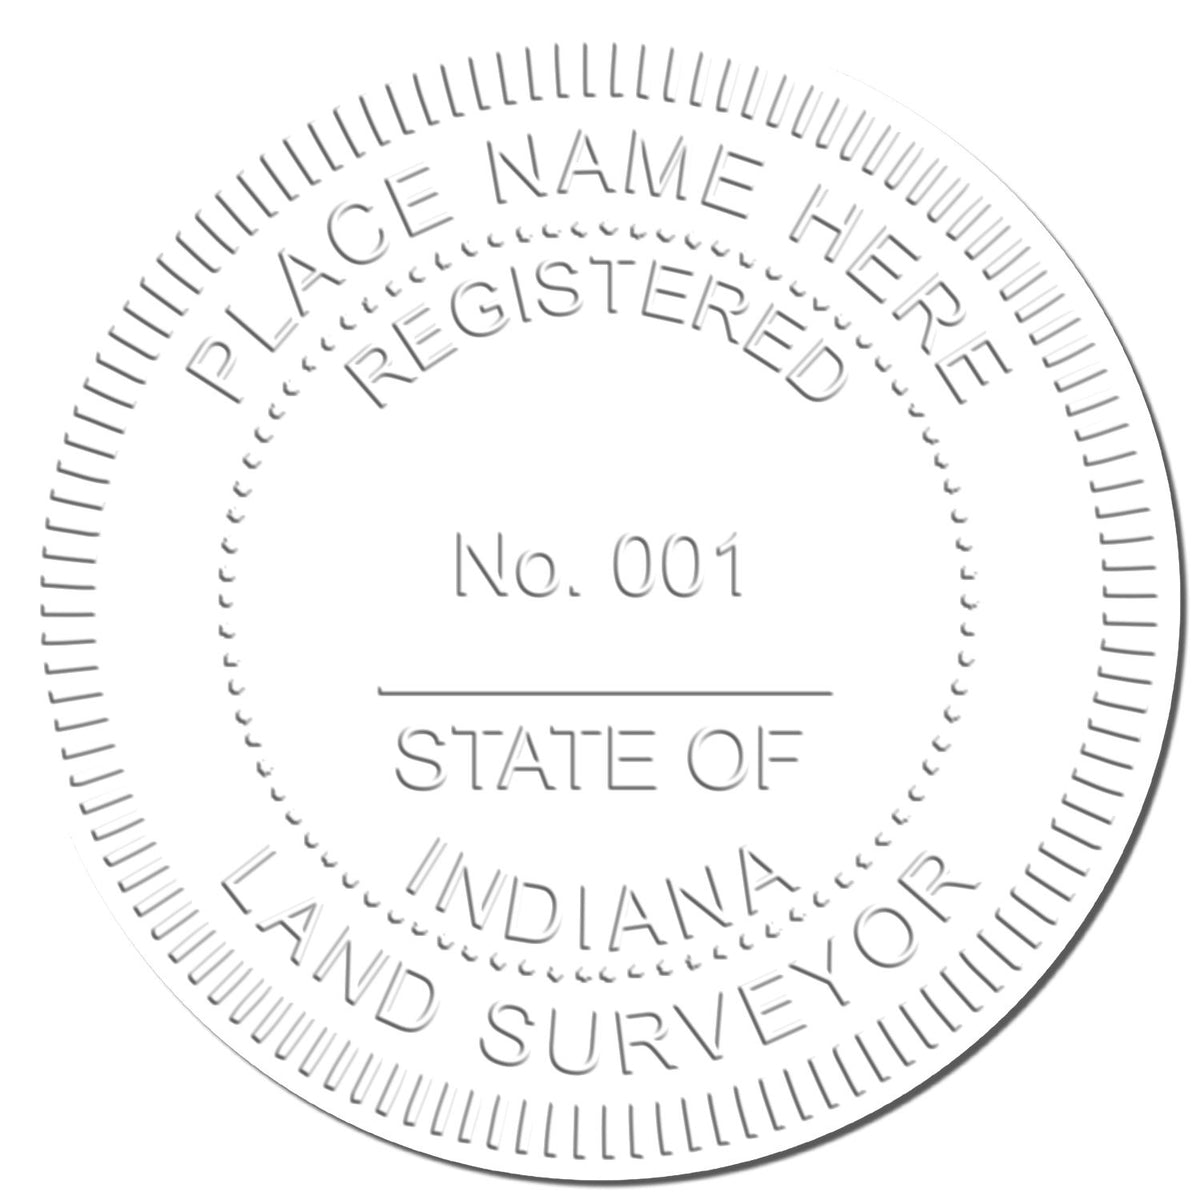 This paper is stamped with a sample imprint of the State of Indiana Soft Land Surveyor Embossing Seal, signifying its quality and reliability.